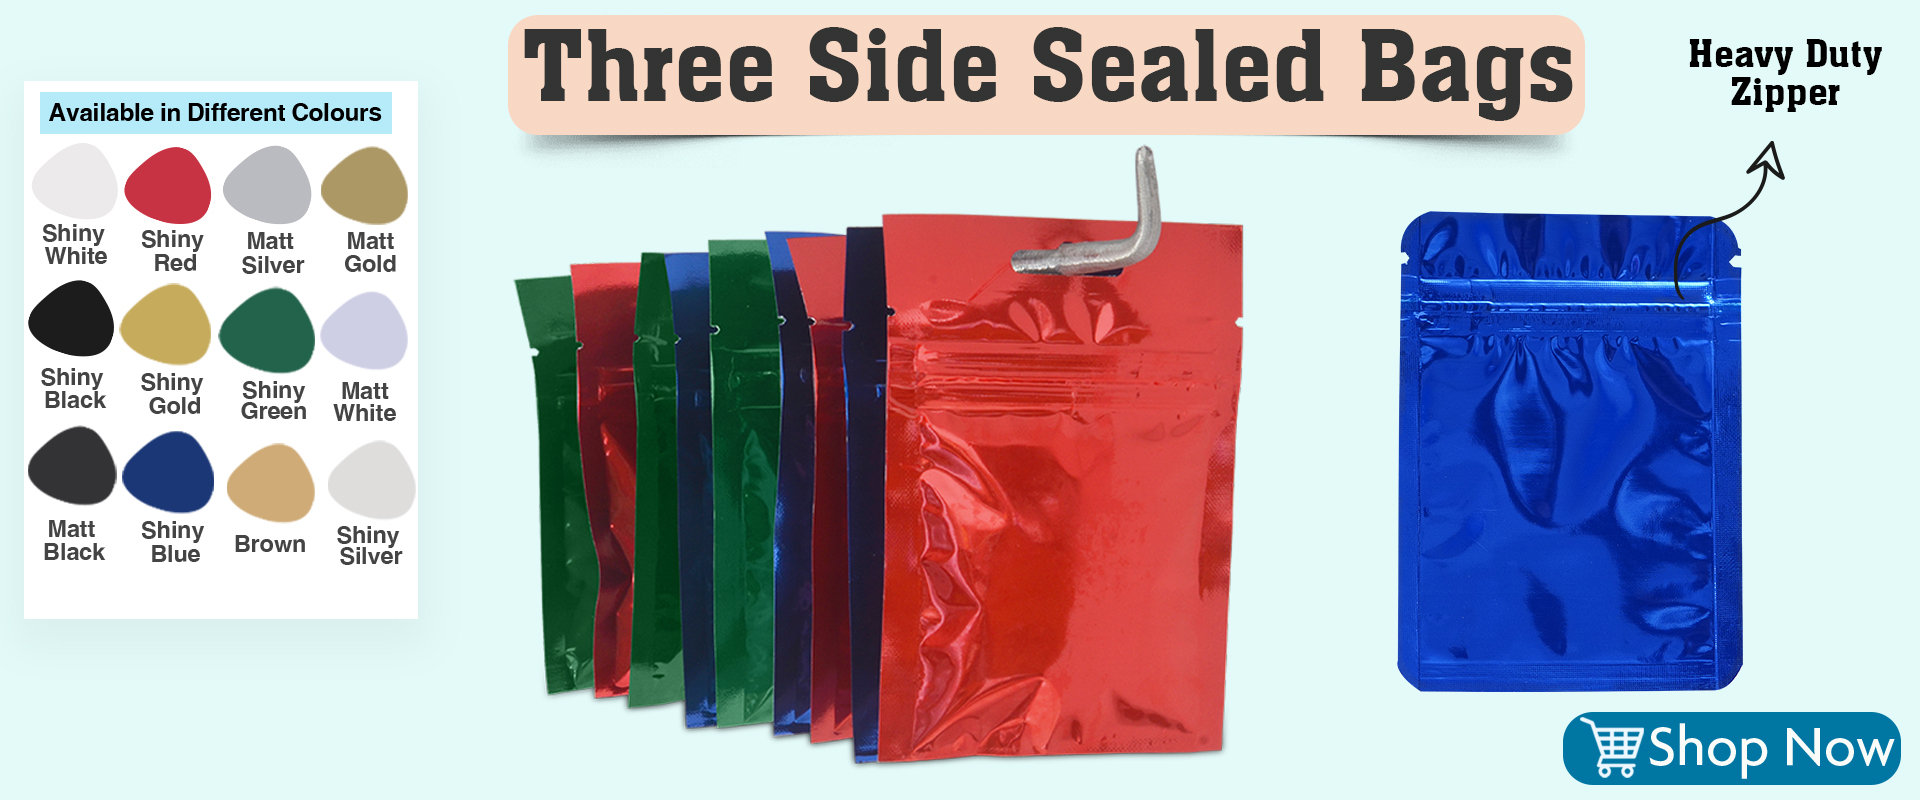 Three Sided Seal bags